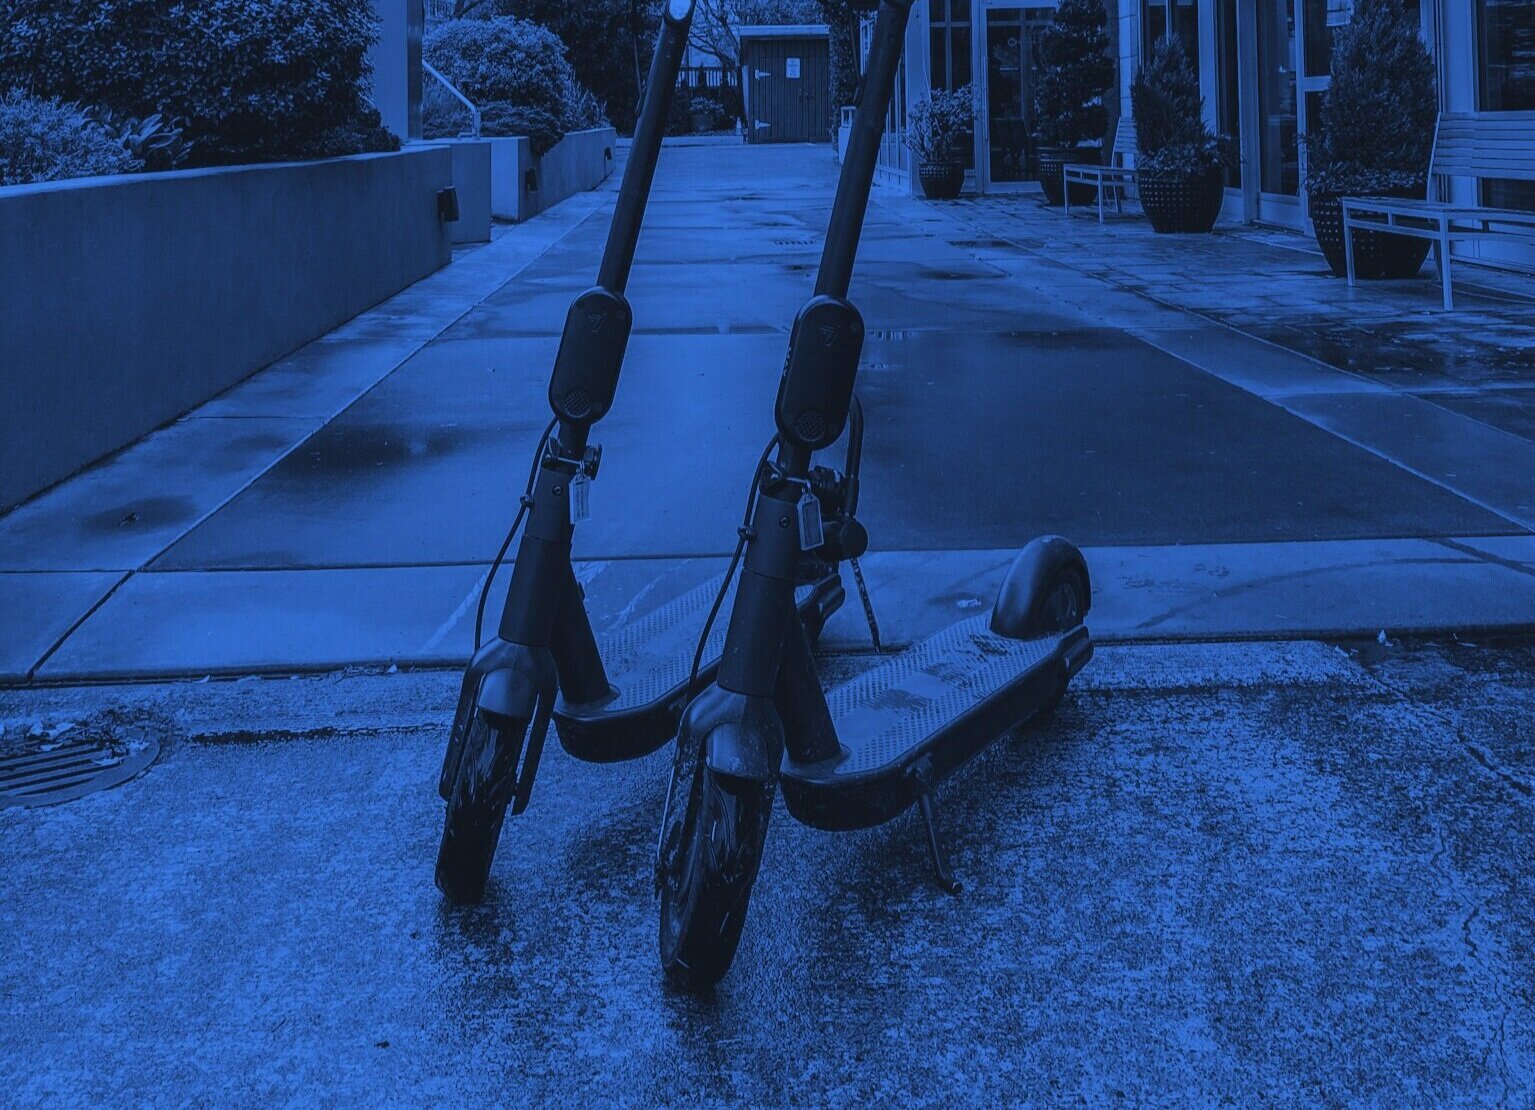 “I rented two of these scooters last week. I was completely blown away by how much fun it was. I saw so much of the city I didn’t know existed.” - — Hotel Guest (Victoria BC)